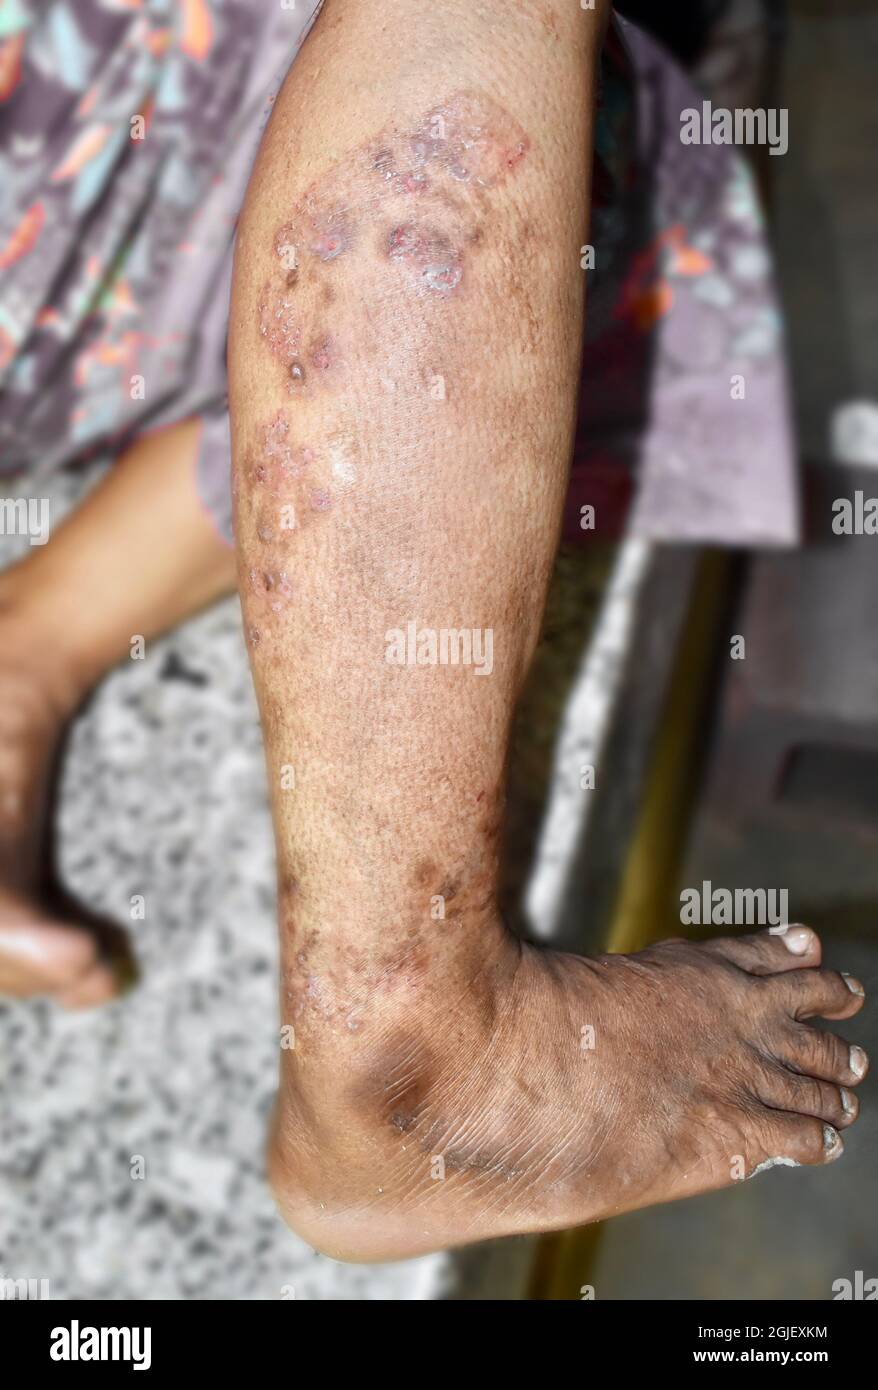 Fungal infection called tinea corporis in leg of Asian woman. Widespread ringworm over lower limb. Stock Photo